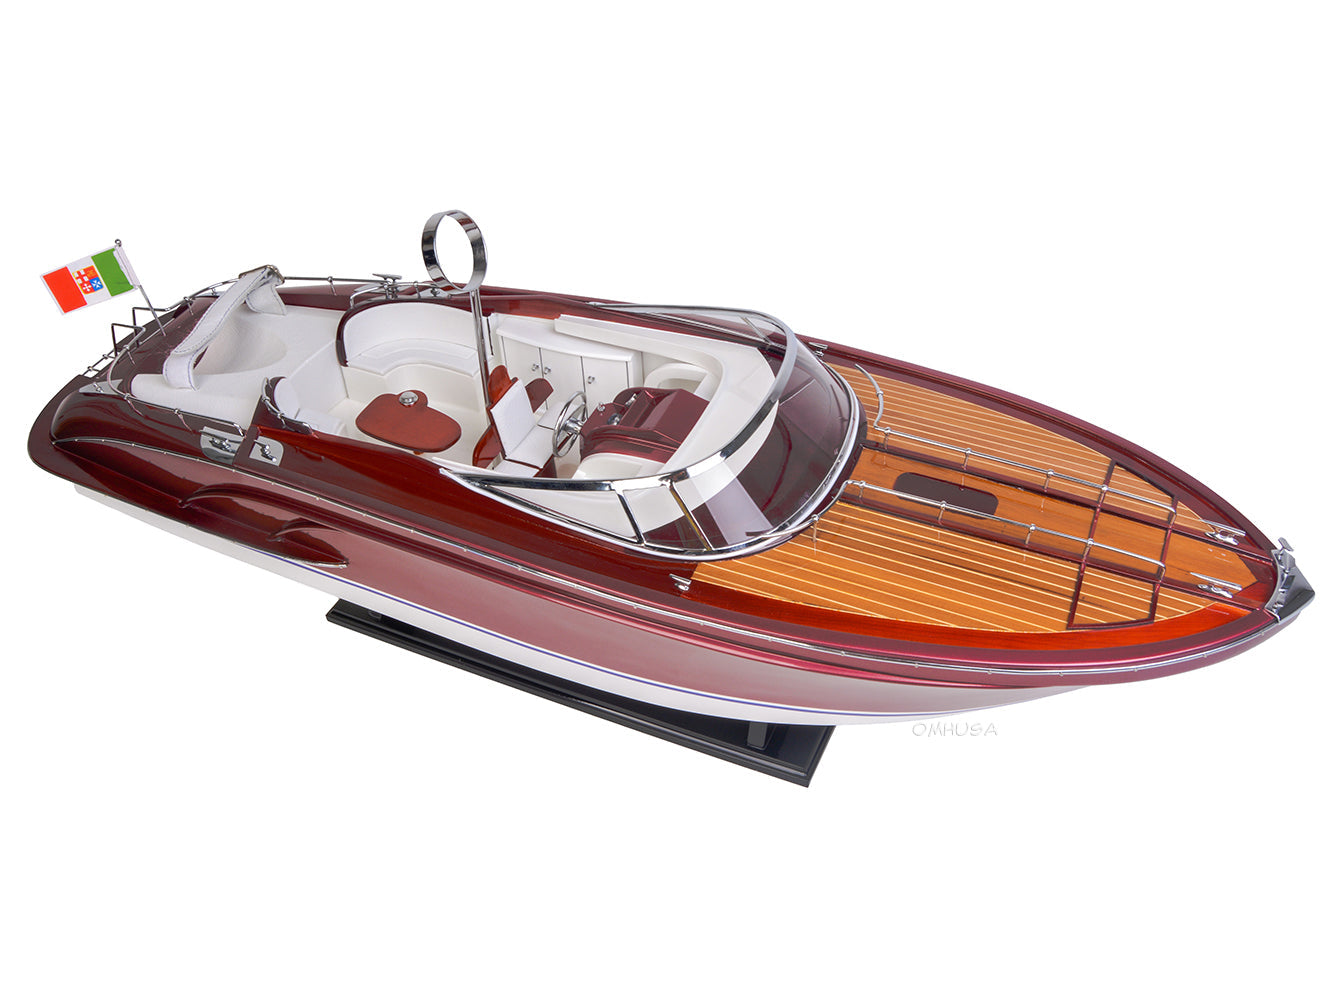 ALDO Hobbies & Creative Arts> Collectibles> Scale Model Luxurious Riva Rivarama Speed Boat and Wine Holder Wood Model Boat Assembled